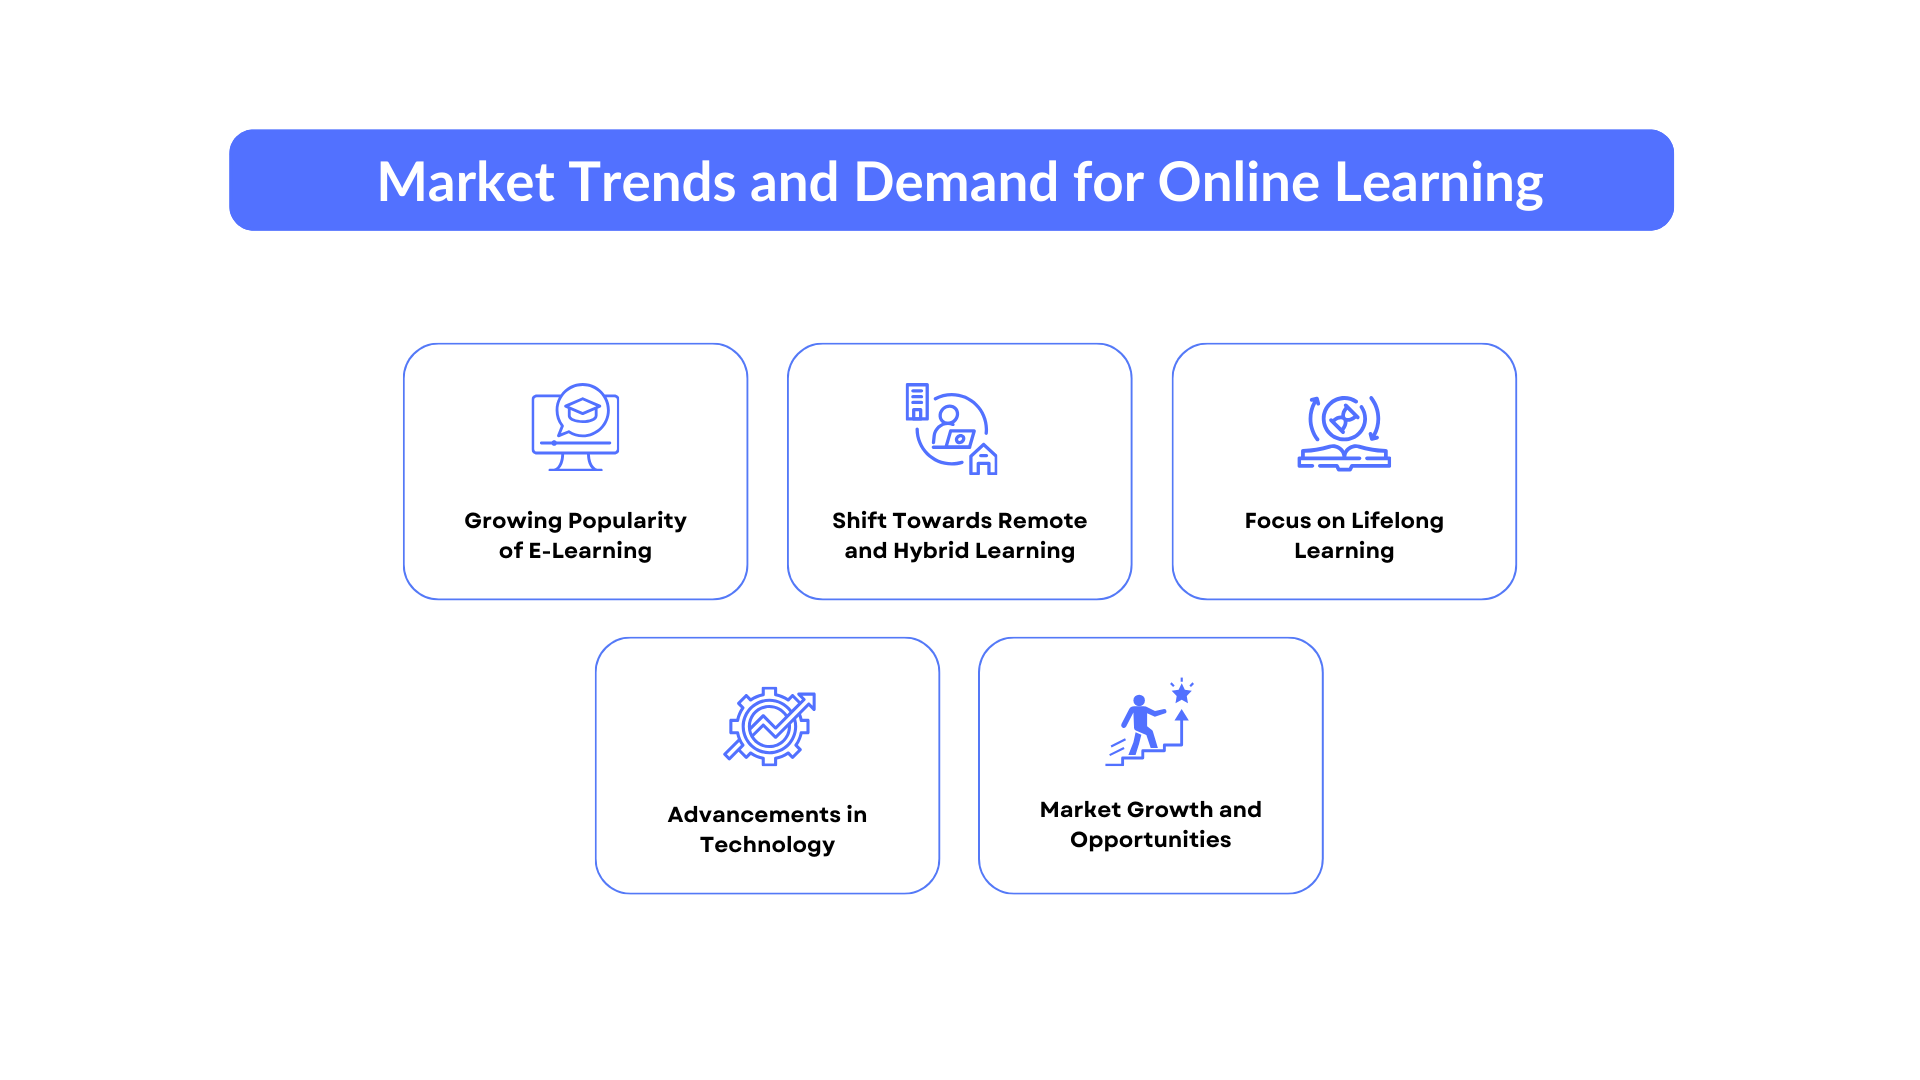 Market Trends and Demand for Online Learning